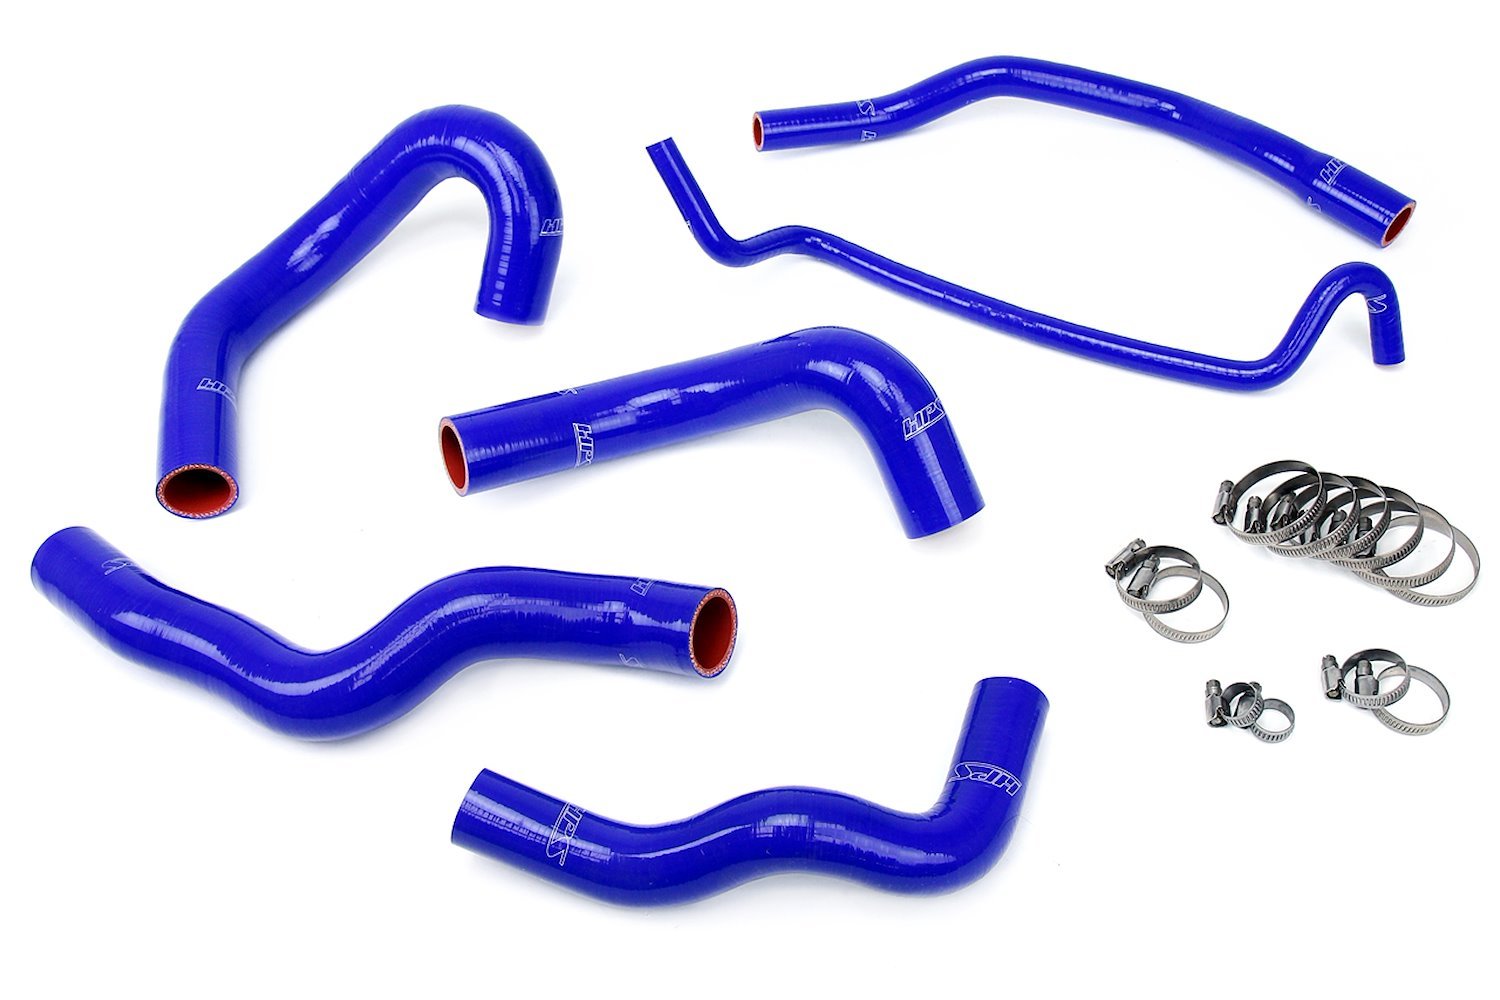 57-1013-BLUE Radiator Hose Kit, High-Temp 3-Ply Reinforced Silicone, Replace OEM Rubber Radiator Coolant Hoses